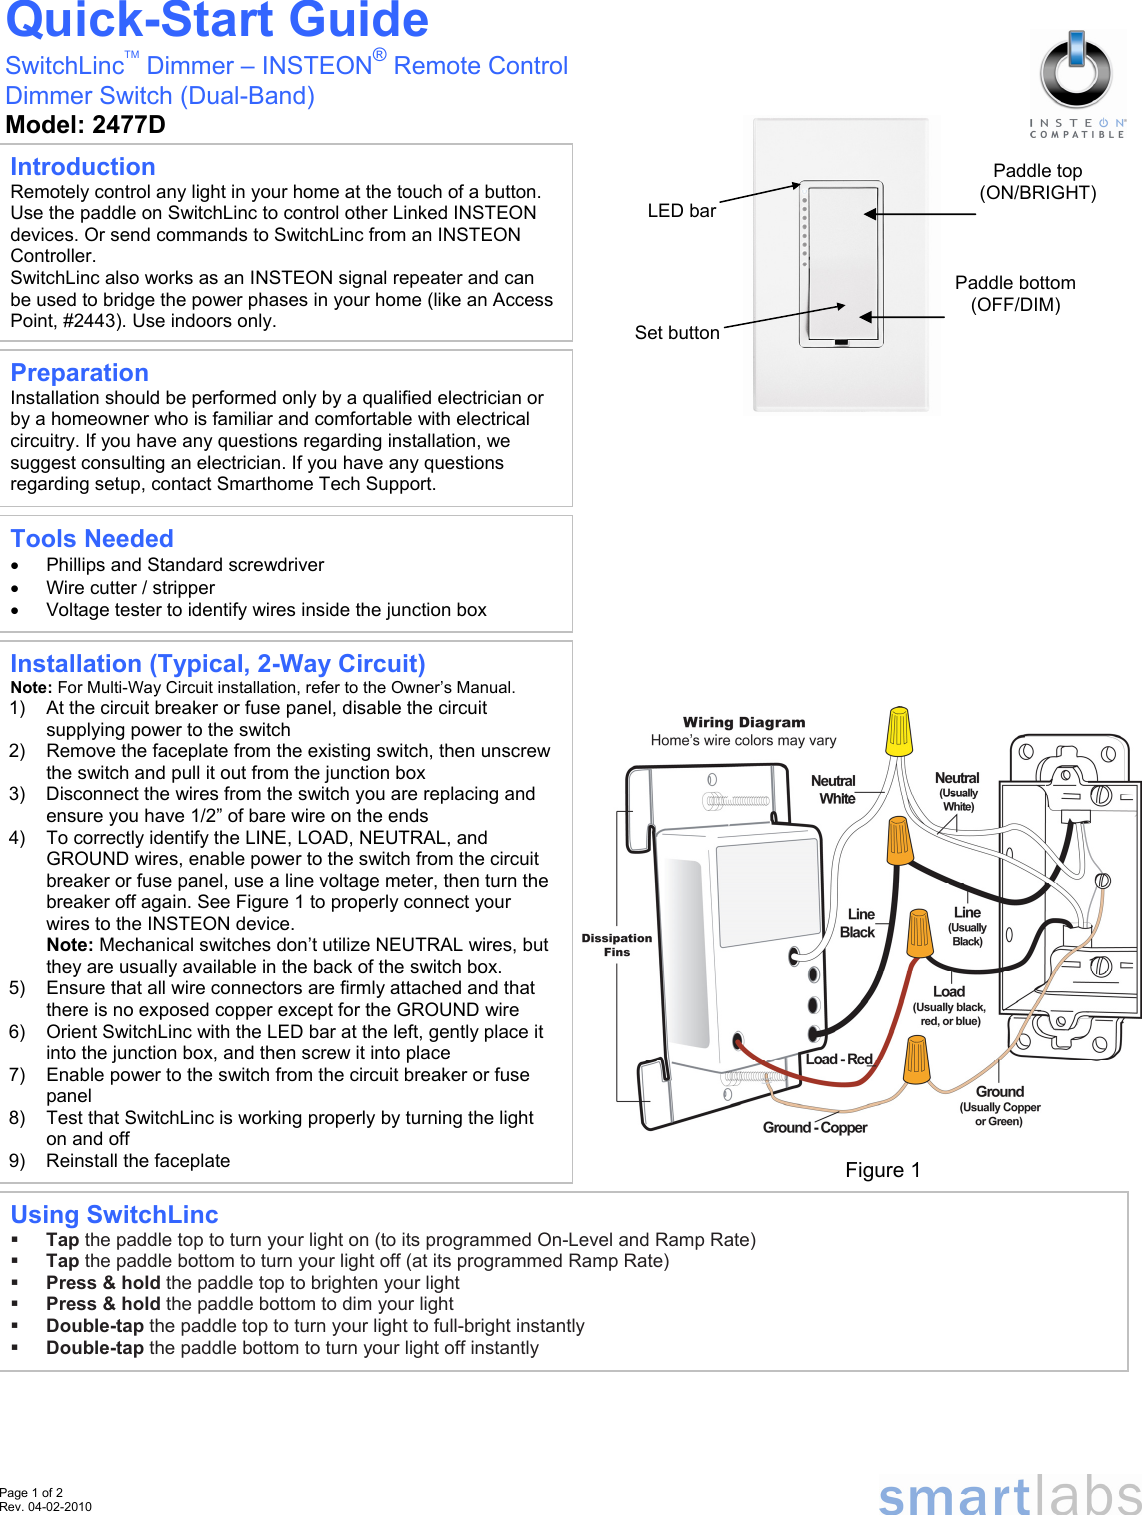  Page 1 of 2 Rev. 04-02-2010                                                                                                                                                                                                                                                                                                                         Quick-Start Guide SwitchLincTM Dimmer – INSTEON® Remote Control  Dimmer Switch (Dual-Band) Model: 2477D Preparation Installation should be performed only by a qualified electrician or by a homeowner who is familiar and comfortable with electrical circuitry. If you have any questions regarding installation, we suggest consulting an electrician. If you have any questions regarding setup, contact Smarthome Tech Support. LED barSet buttonFigure 1 Introduction Remotely control any light in your home at the touch of a button. Use the paddle on SwitchLinc to control other Linked INSTEON devices. Or send commands to SwitchLinc from an INSTEON Controller.  SwitchLinc also works as an INSTEON signal repeater and can be used to bridge the power phases in your home (like an Access Point, #2443). Use indoors only. Using SwitchLinc  Tap the paddle top to turn your light on (to its programmed On-Level and Ramp Rate)  Tap the paddle bottom to turn your light off (at its programmed Ramp Rate)  Press &amp; hold the paddle top to brighten your light  Press &amp; hold the paddle bottom to dim your light  Double-tap the paddle top to turn your light to full-bright instantly  Double-tap the paddle bottom to turn your light off instantly  Paddle bottom  (OFF/DIM) Paddle top (ON/BRIGHT) Tools Needed •  Phillips and Standard screwdriver •  Wire cutter / stripper •  Voltage tester to identify wires inside the junction box Installation (Typical, 2-Way Circuit) Note: For Multi-Way Circuit installation, refer to the Owner’s Manual. 1)  At the circuit breaker or fuse panel, disable the circuit supplying power to the switch 2)  Remove the faceplate from the existing switch, then unscrew the switch and pull it out from the junction box 3)  Disconnect the wires from the switch you are replacing and ensure you have 1/2” of bare wire on the ends 4)  To correctly identify the LINE, LOAD, NEUTRAL, and GROUND wires, enable power to the switch from the circuit breaker or fuse panel, use a line voltage meter, then turn the breaker off again. See Figure 1 to properly connect your wires to the INSTEON device. Note: Mechanical switches don’t utilize NEUTRAL wires, but they are usually available in the back of the switch box. 5)  Ensure that all wire connectors are firmly attached and that there is no exposed copper except for the GROUND wire 6)  Orient SwitchLinc with the LED bar at the left, gently place it into the junction box, and then screw it into place 7)  Enable power to the switch from the circuit breaker or fuse panel 8)  Test that SwitchLinc is working properly by turning the light on and off 9)  Reinstall the faceplate 